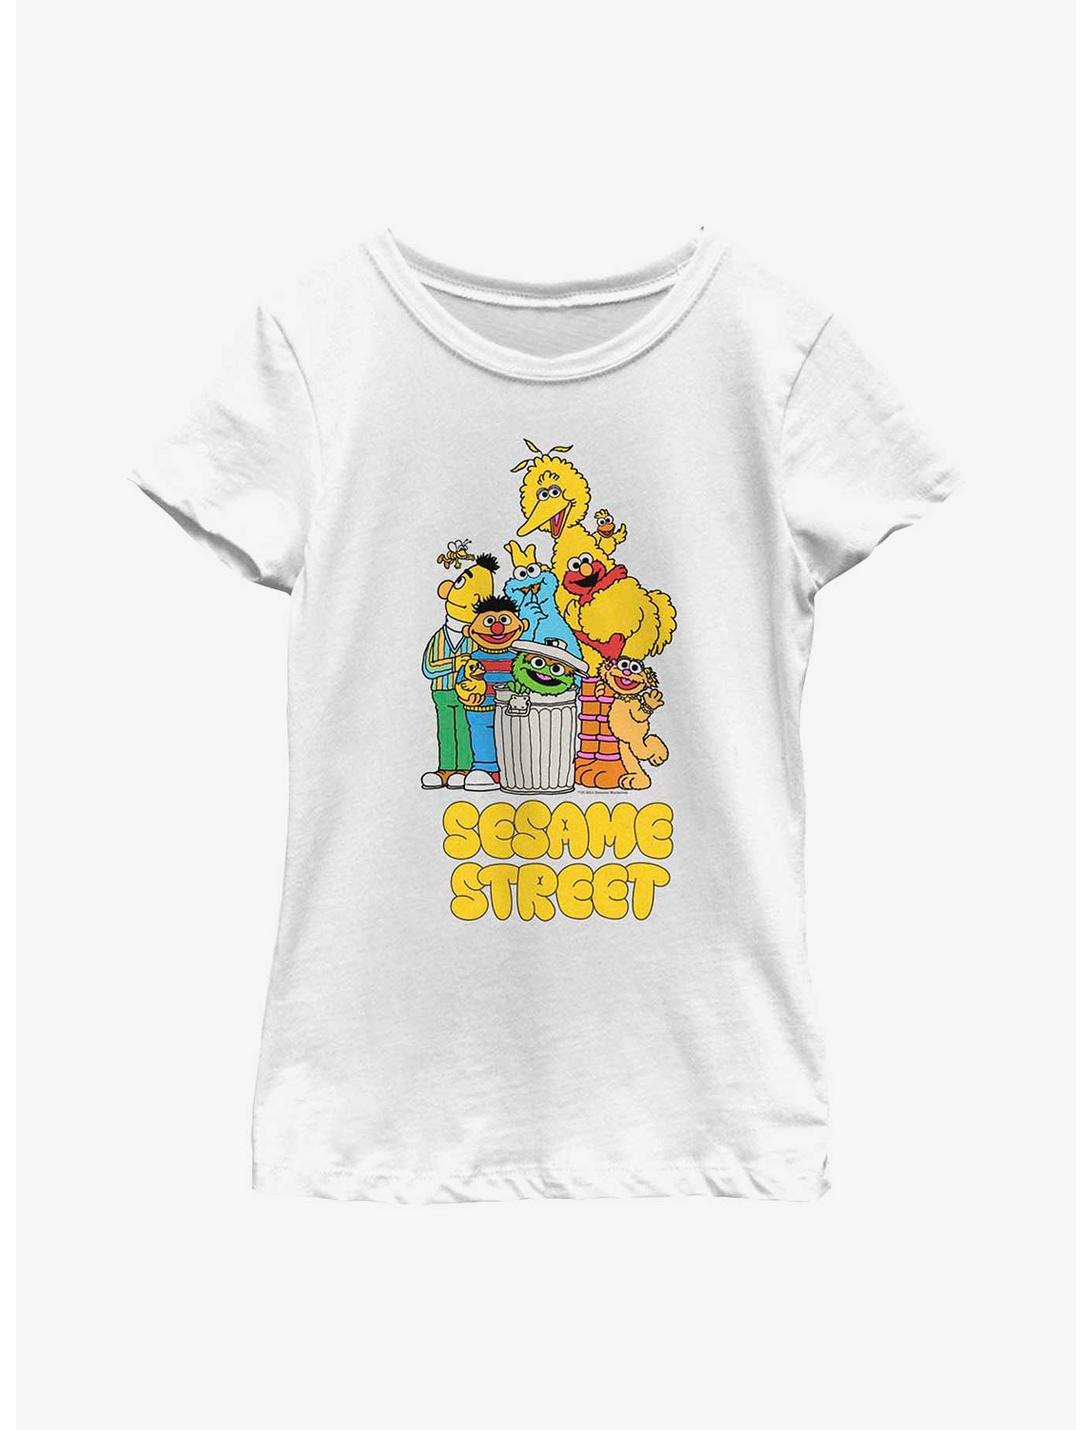 Sesame Street Sesame And Friends Youth Girls T-Shirt, WHITE, hi-res